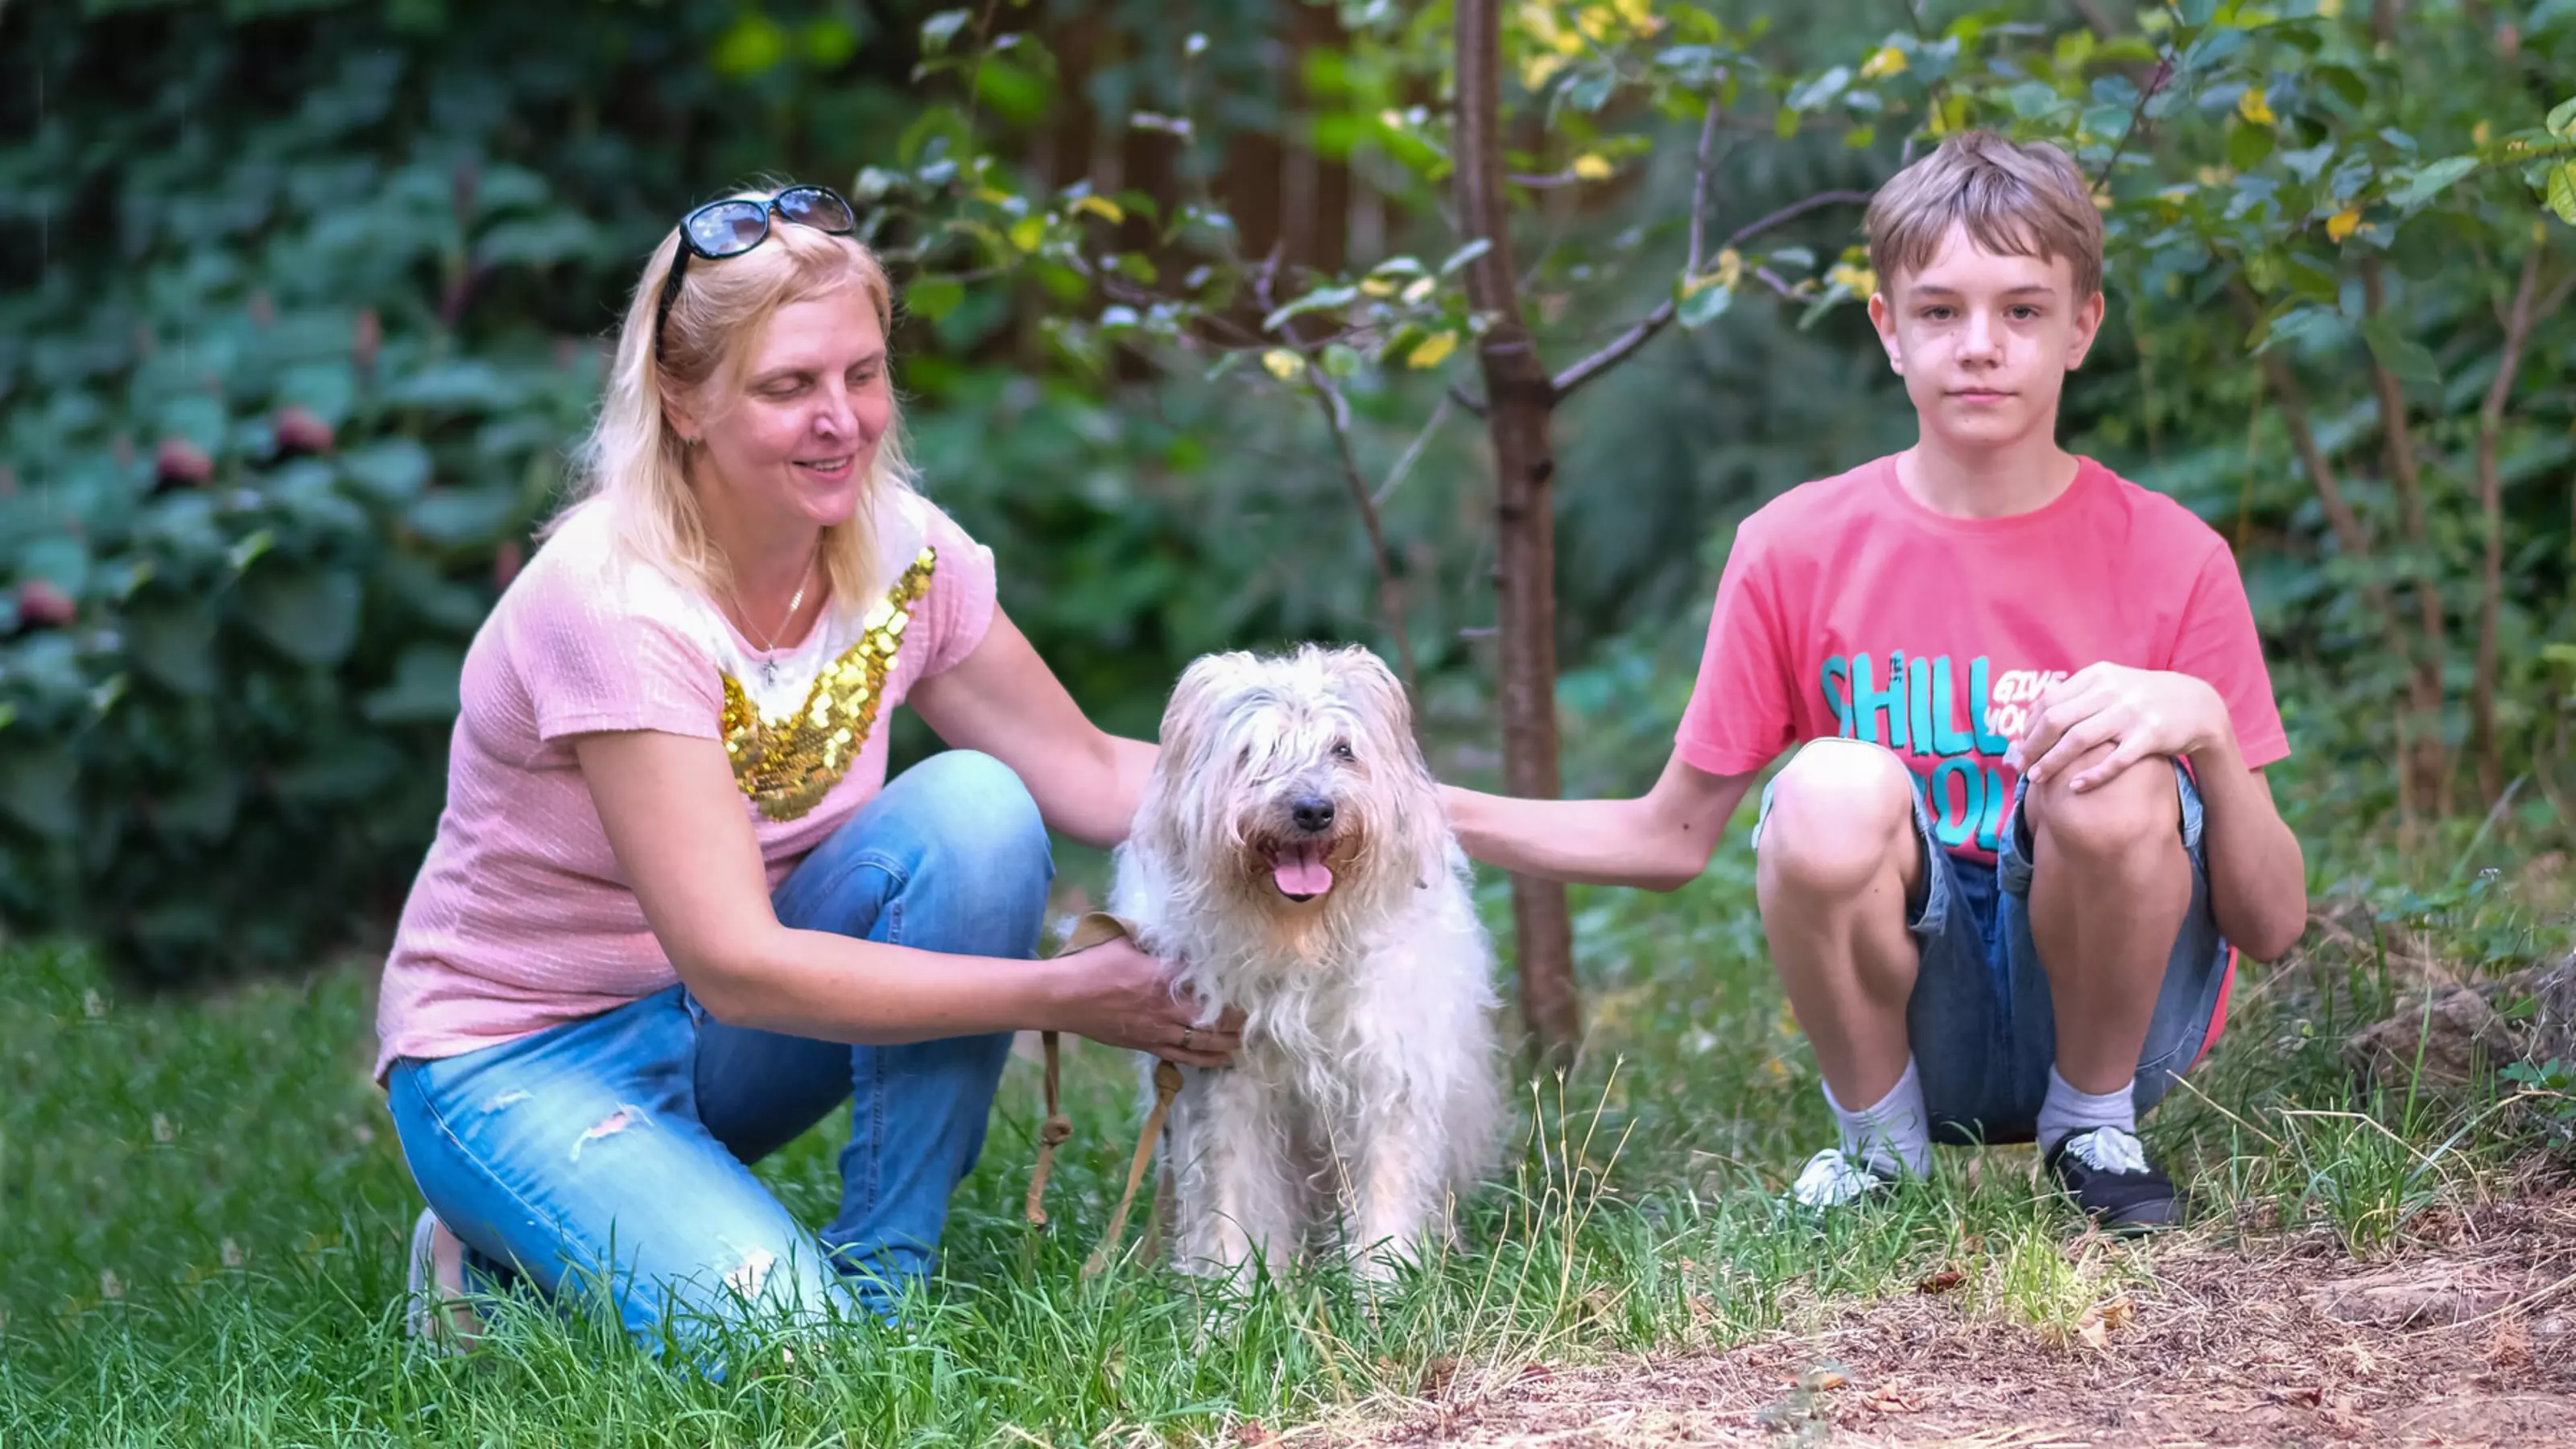 Evgenia and Arkadiy with dog Nika in the middle on grass